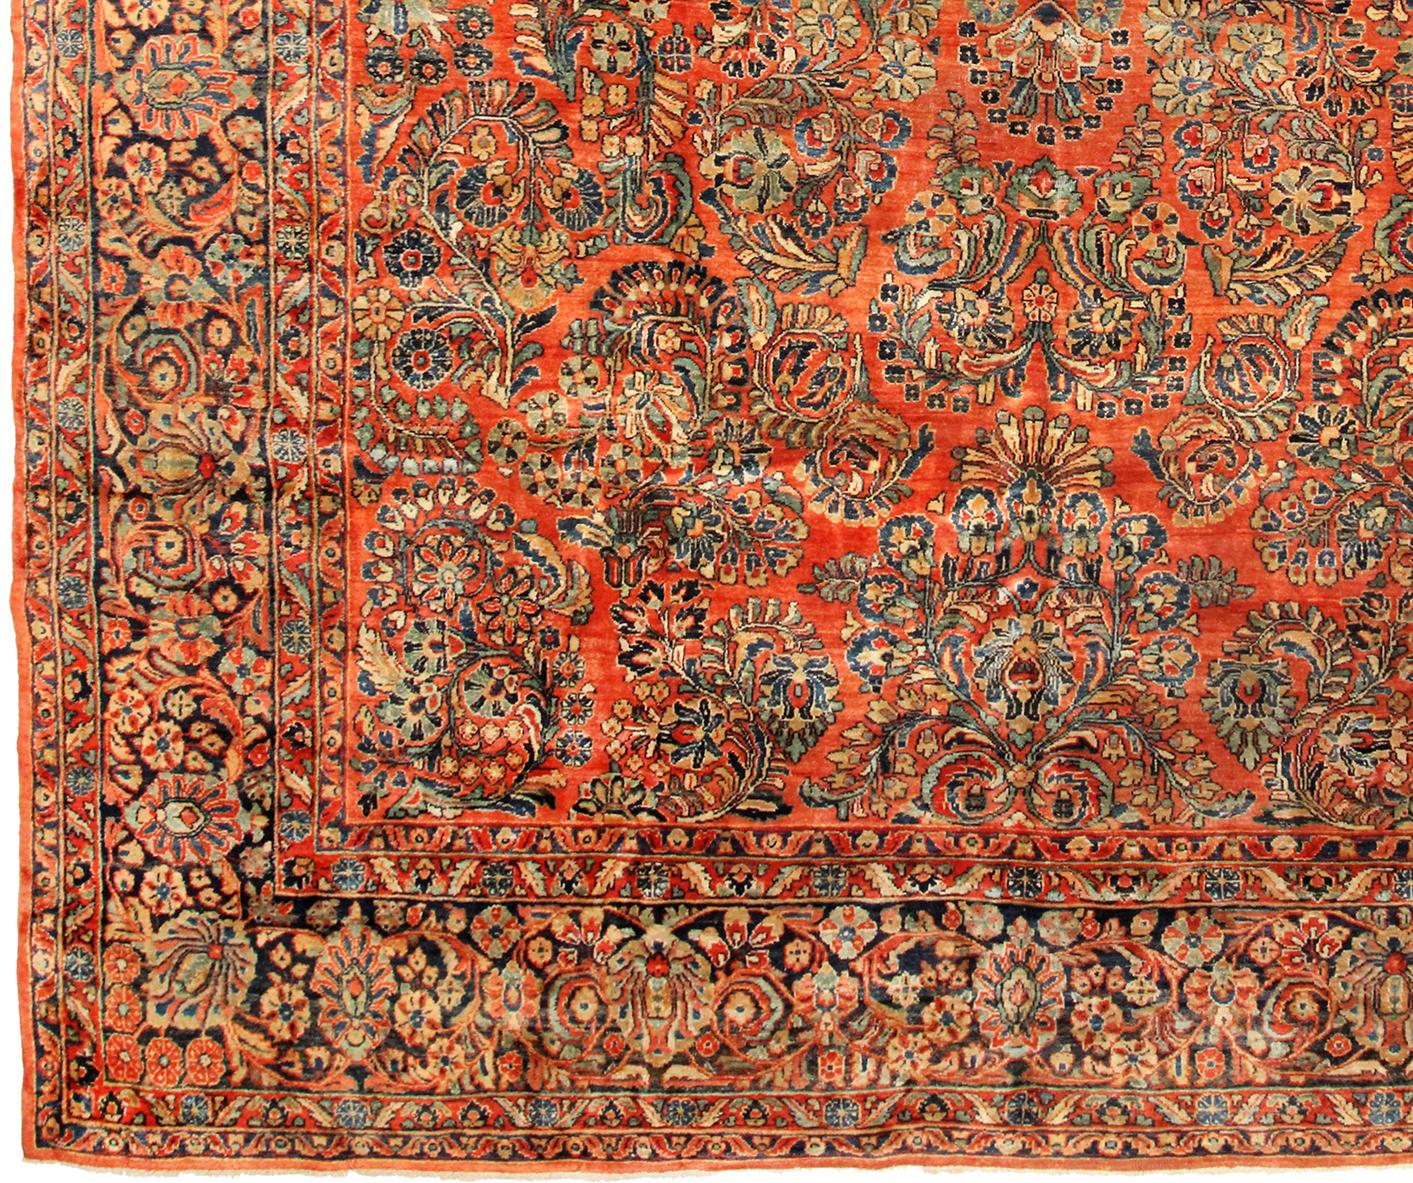 Early 20th Century Antique Persian Sarouk Oriental Rug, in Room Size, with Coral Tones, circa 1920 For Sale